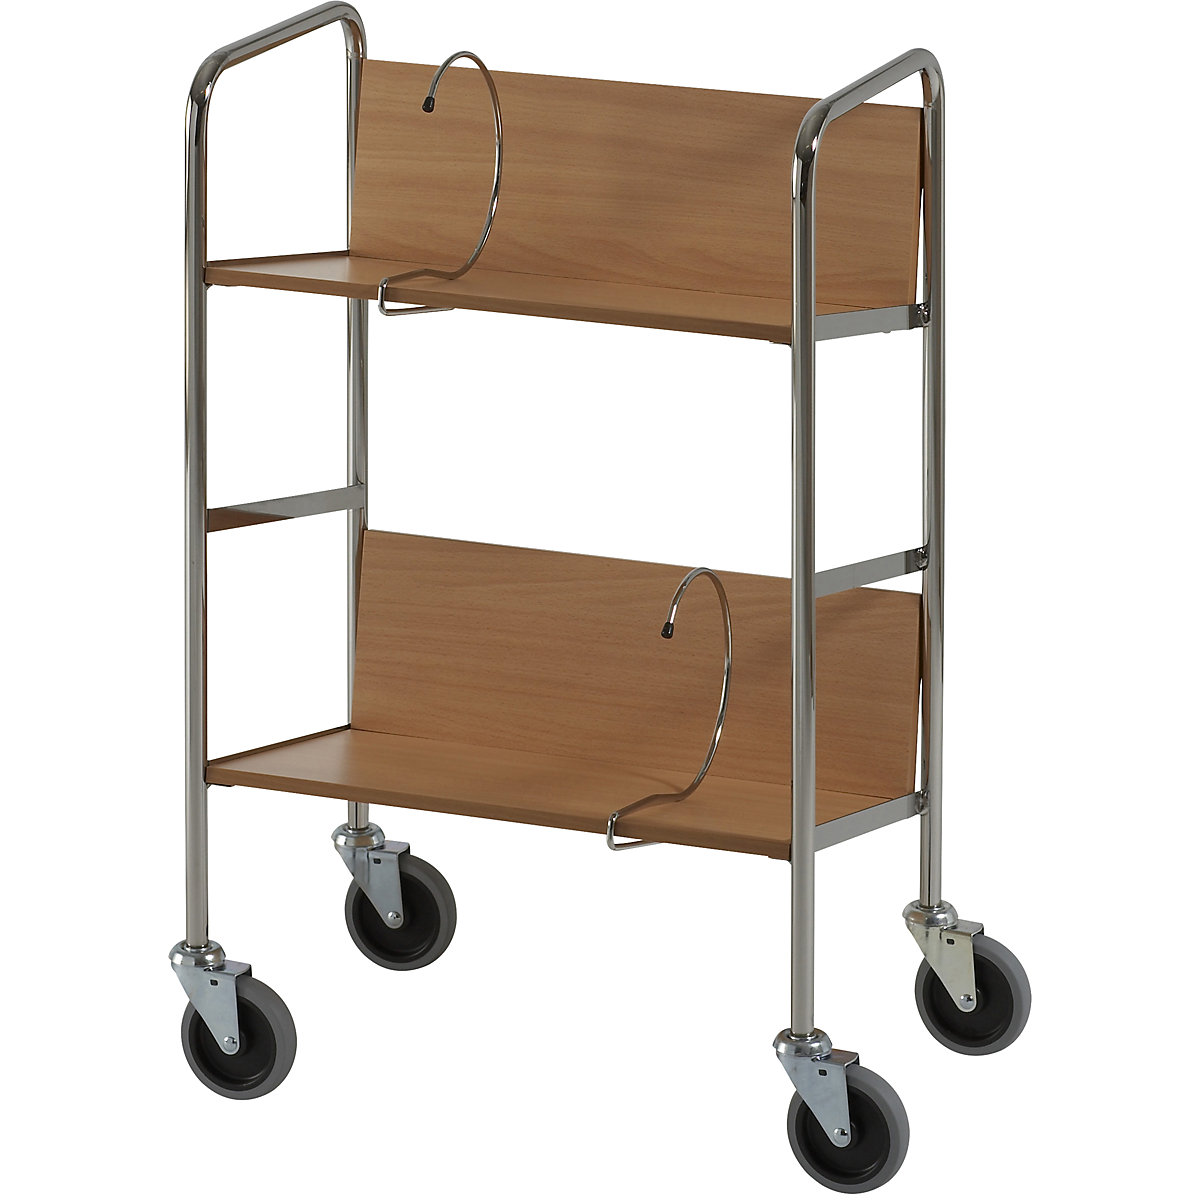 File trolley, chrome plated – HelgeNyberg, 2 shelves, LxWxH 550 x 340 x 840 mm, beech finish, 5+ items-31